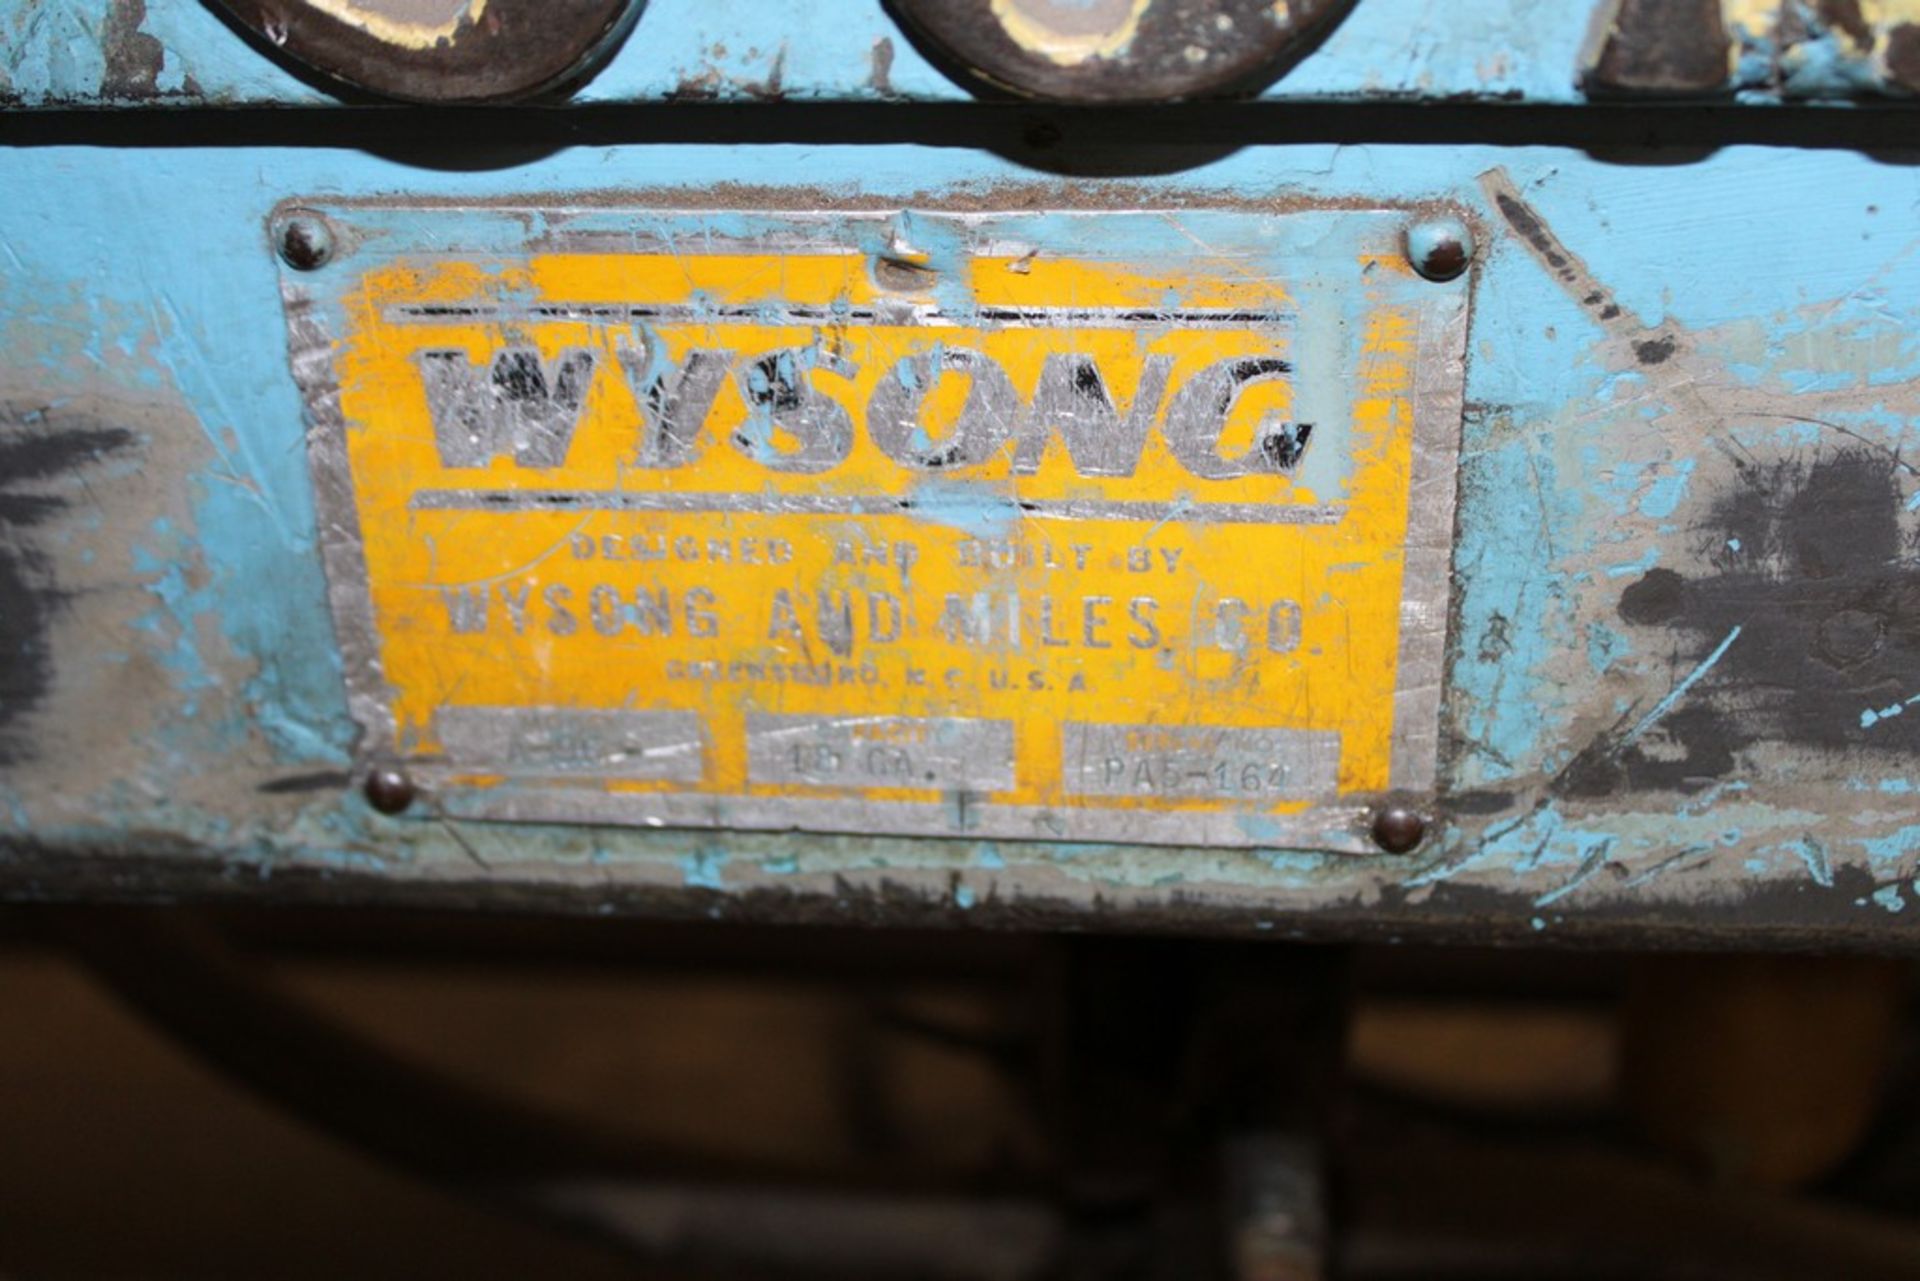 WYSONG MODEL A96 18GA. 8FT PNEUMATIC SHEAR, S/N PA5-164, WITH BACK GAUGE, FOOT PEDAL CONTROL - Image 3 of 6